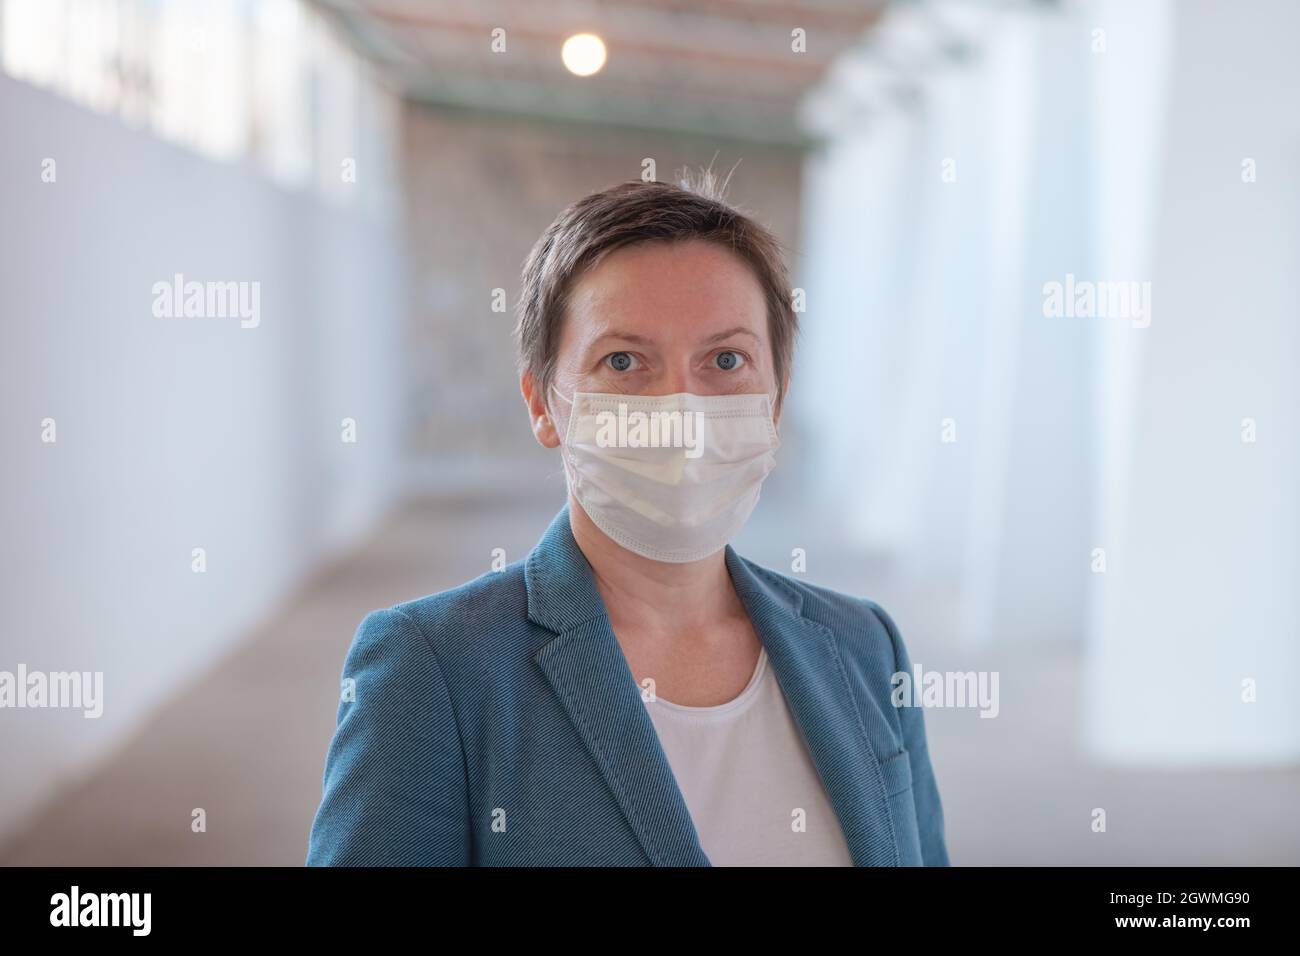 Business woman with protective face mask during Covid 19 pandemics, selective focus Stock Photo